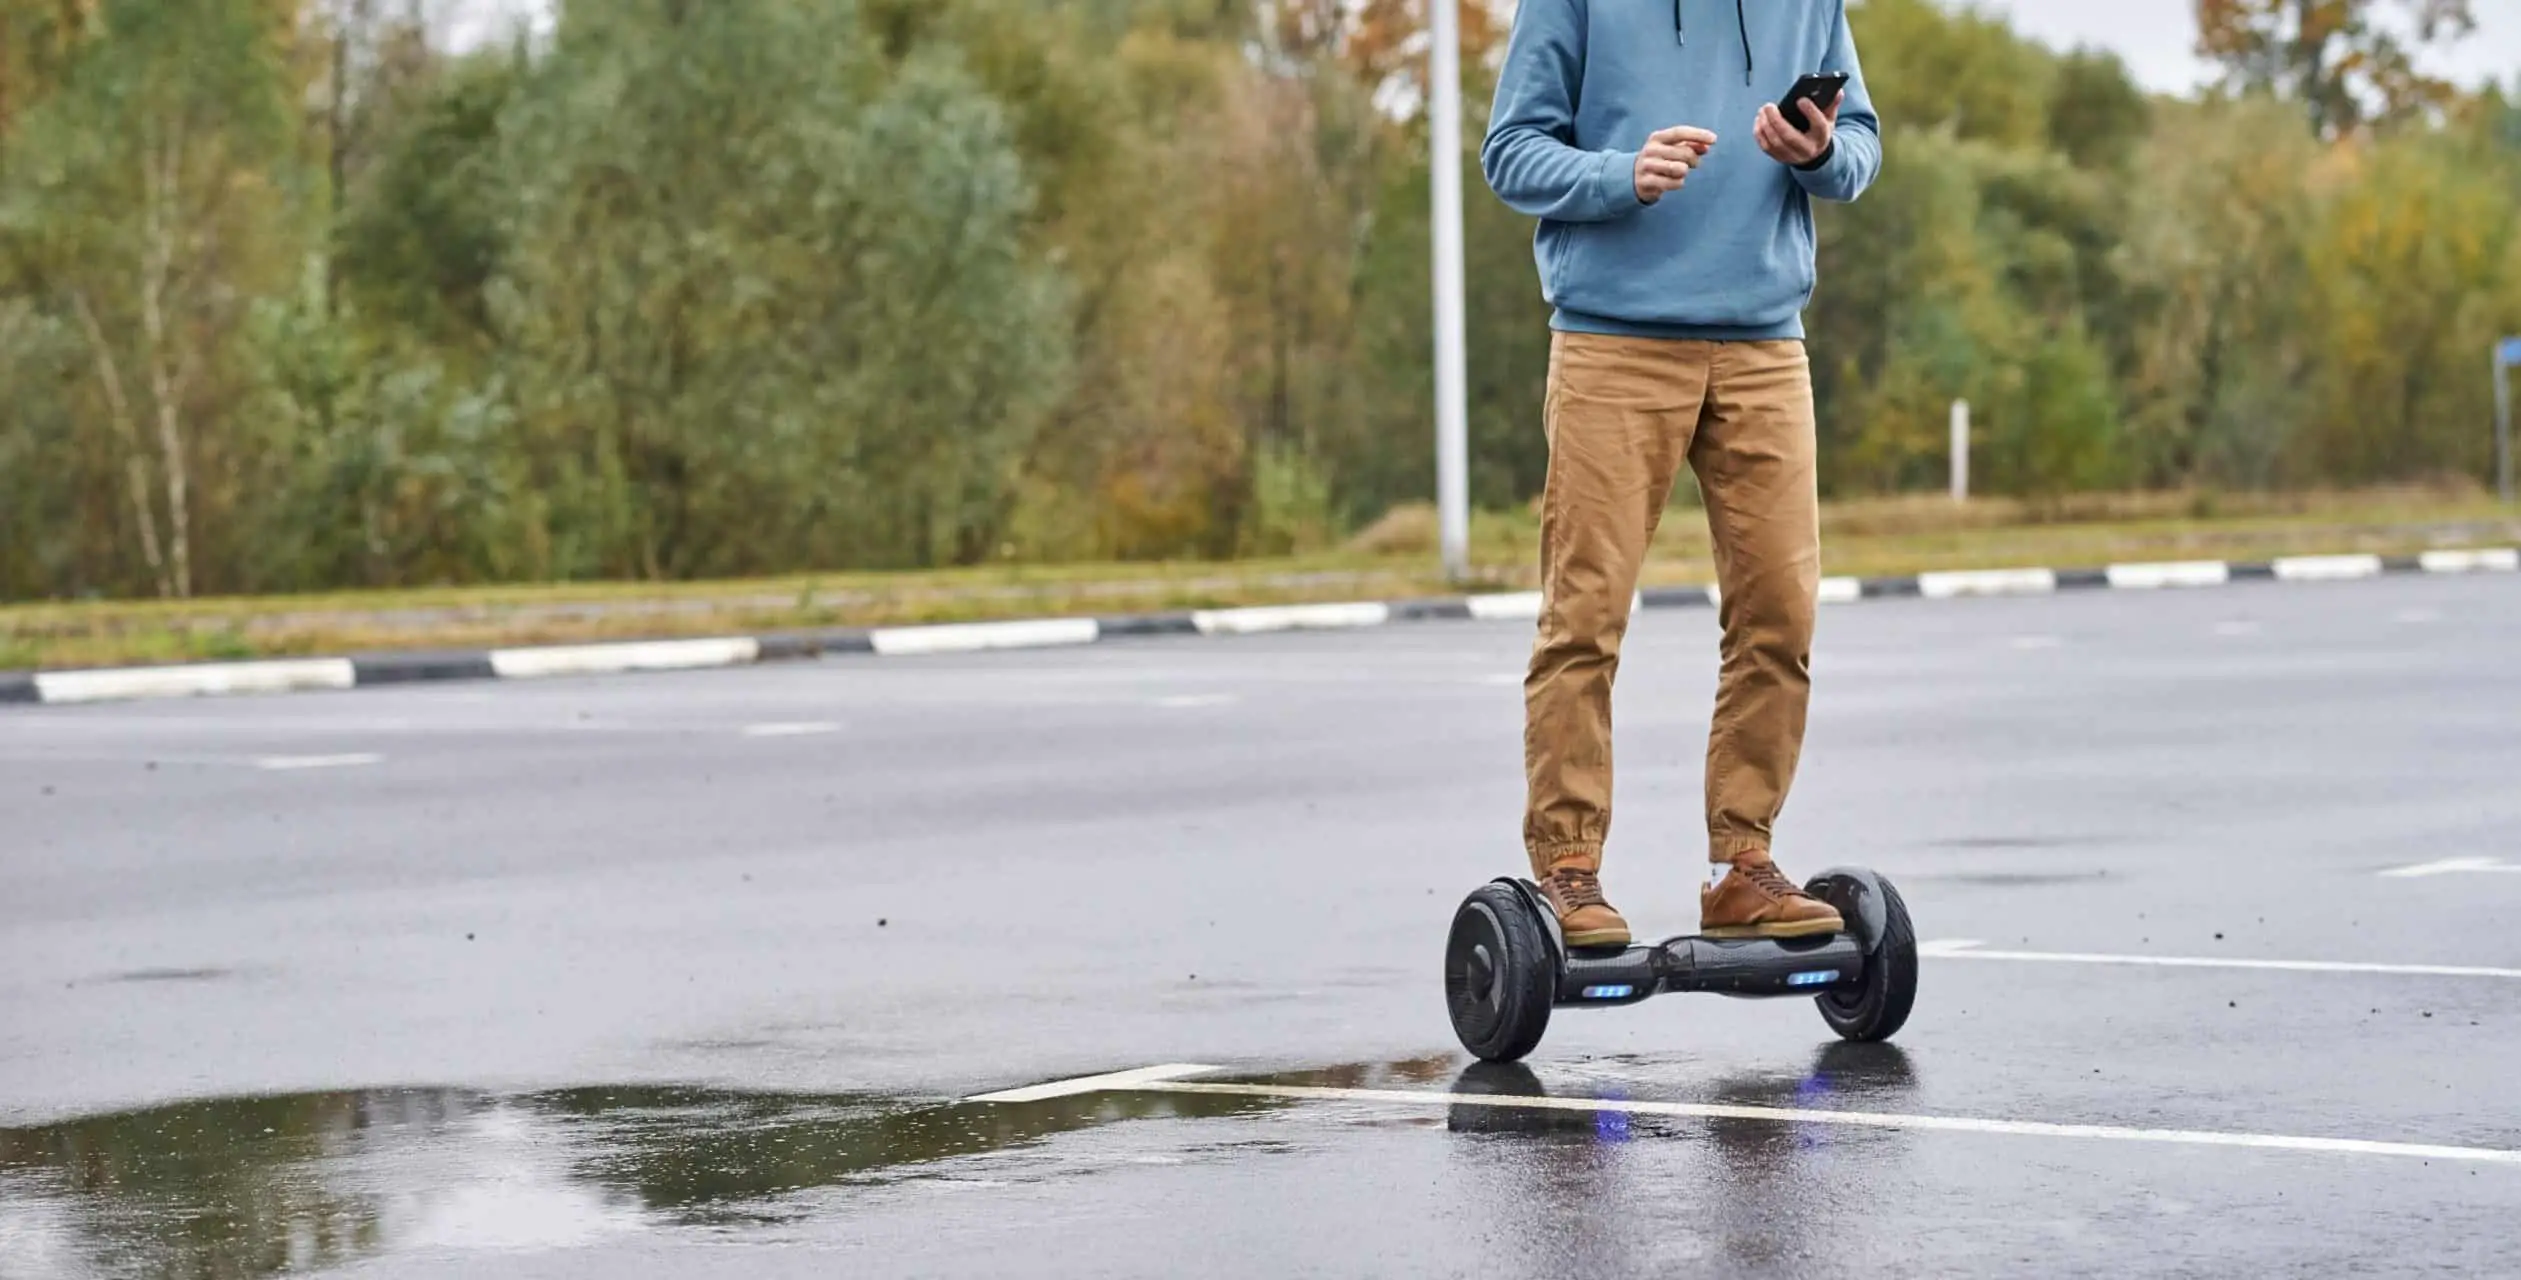 How Much Does a Hoverboard Weight? Definitely Not Thinner Than Air